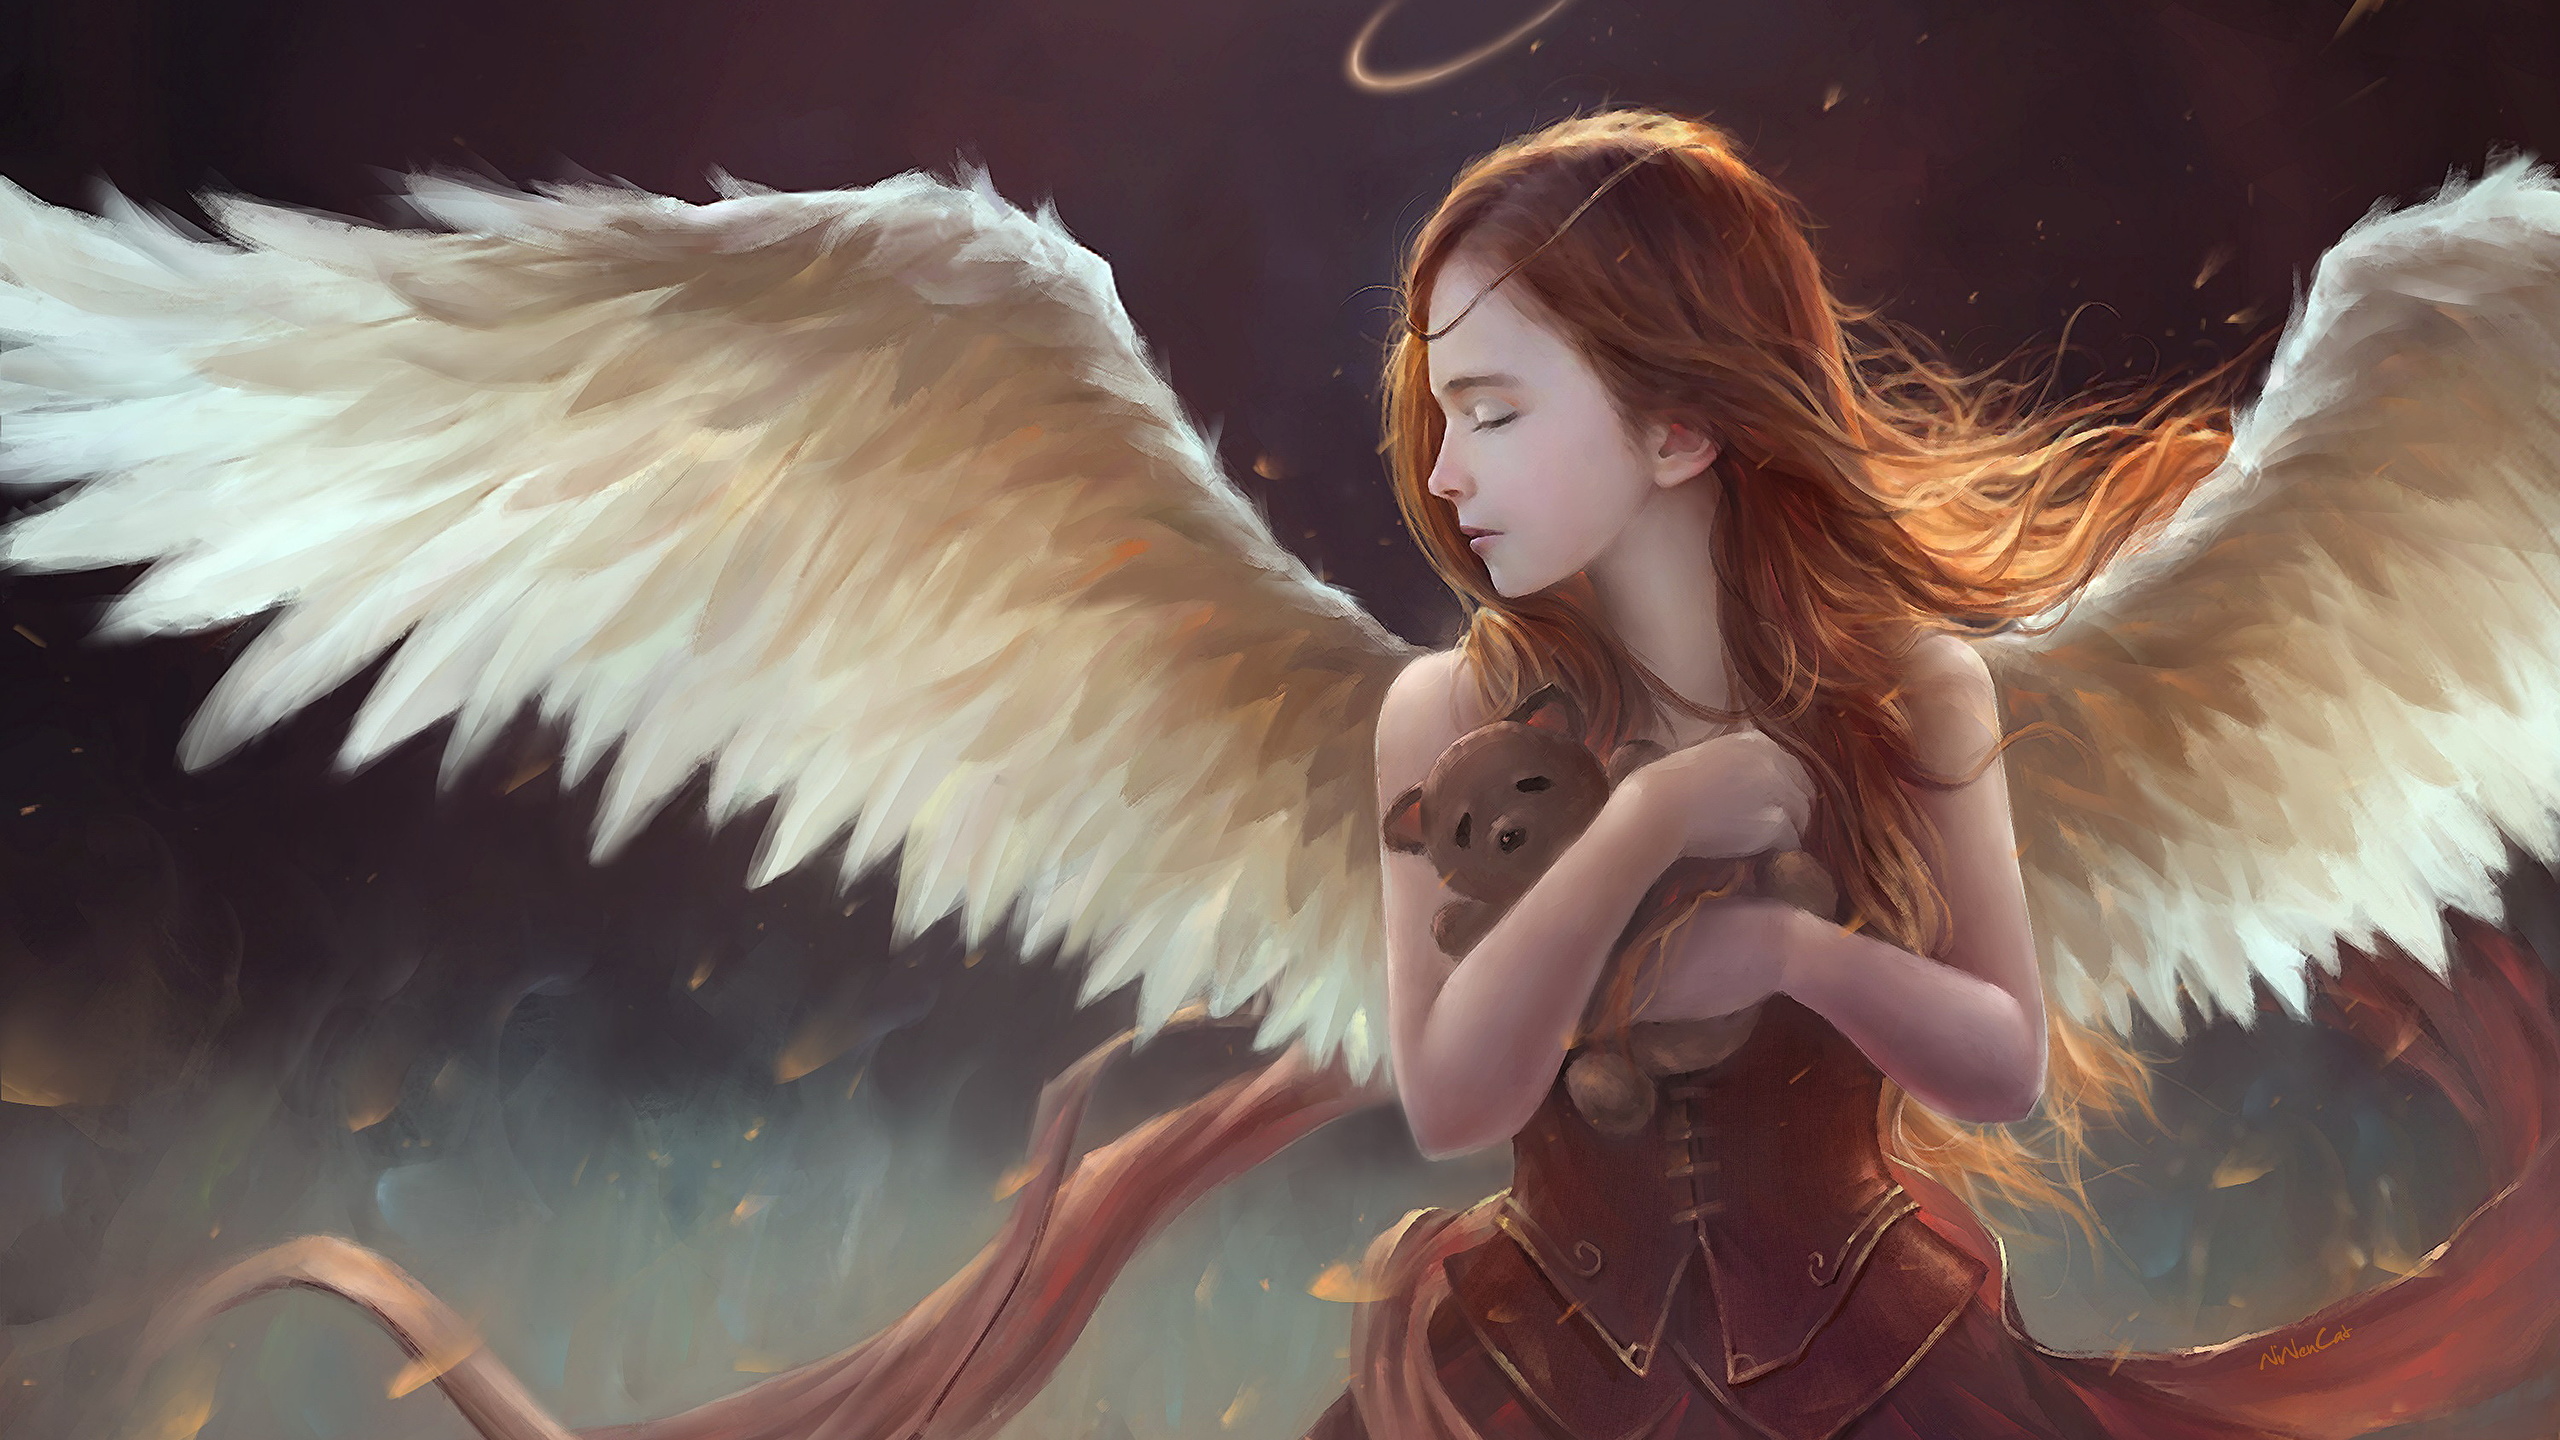 Image Brown Haired Wings Fantasy Young Woman Angel 2560x1440